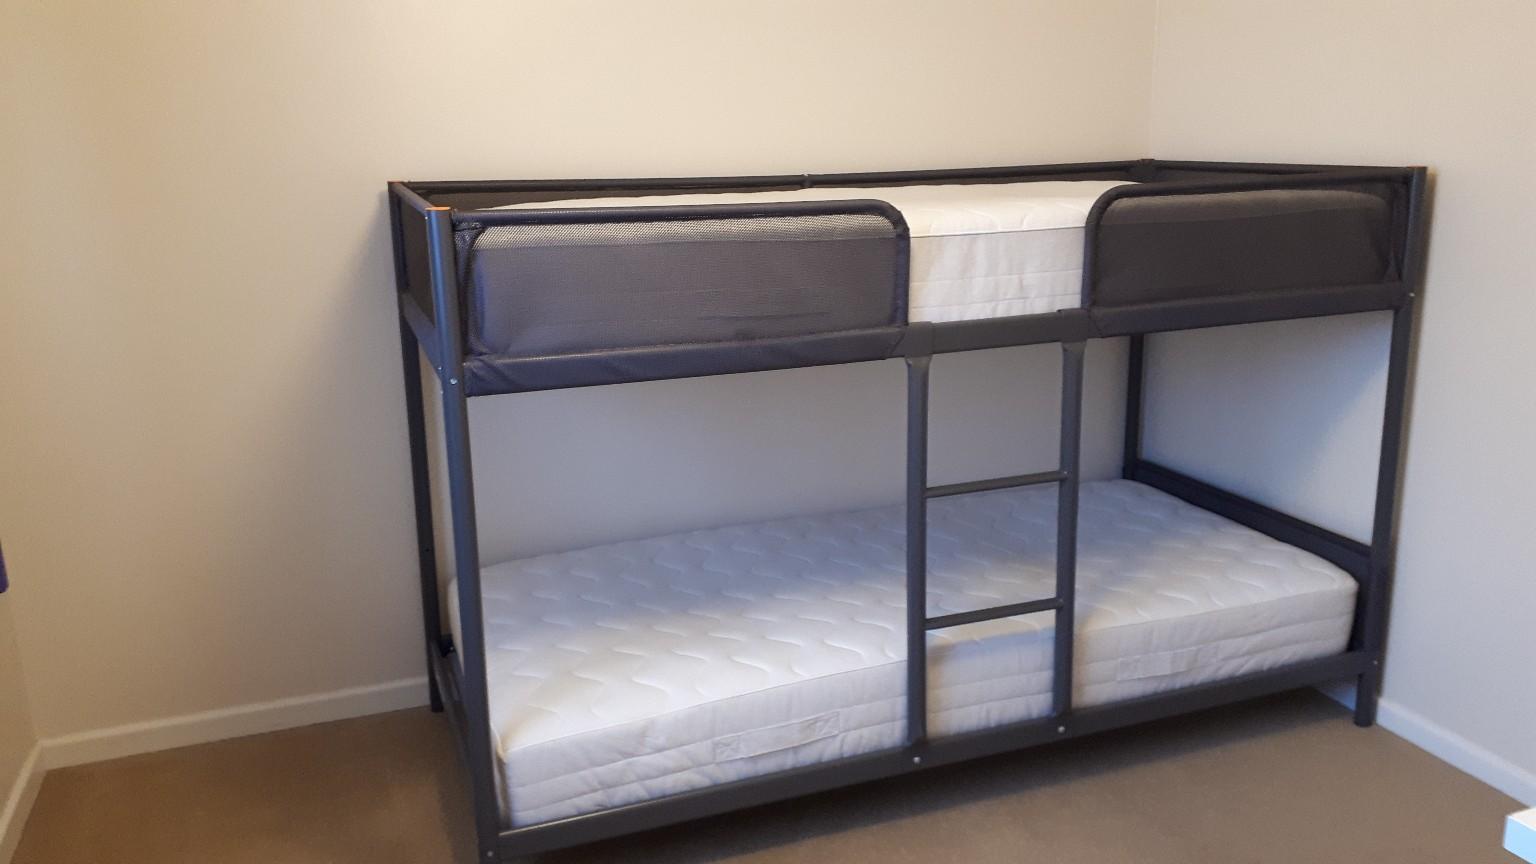 Ikea Tuffing Bunkbeds Complete In Tf1, Ikea Tuffing Bunk Beds